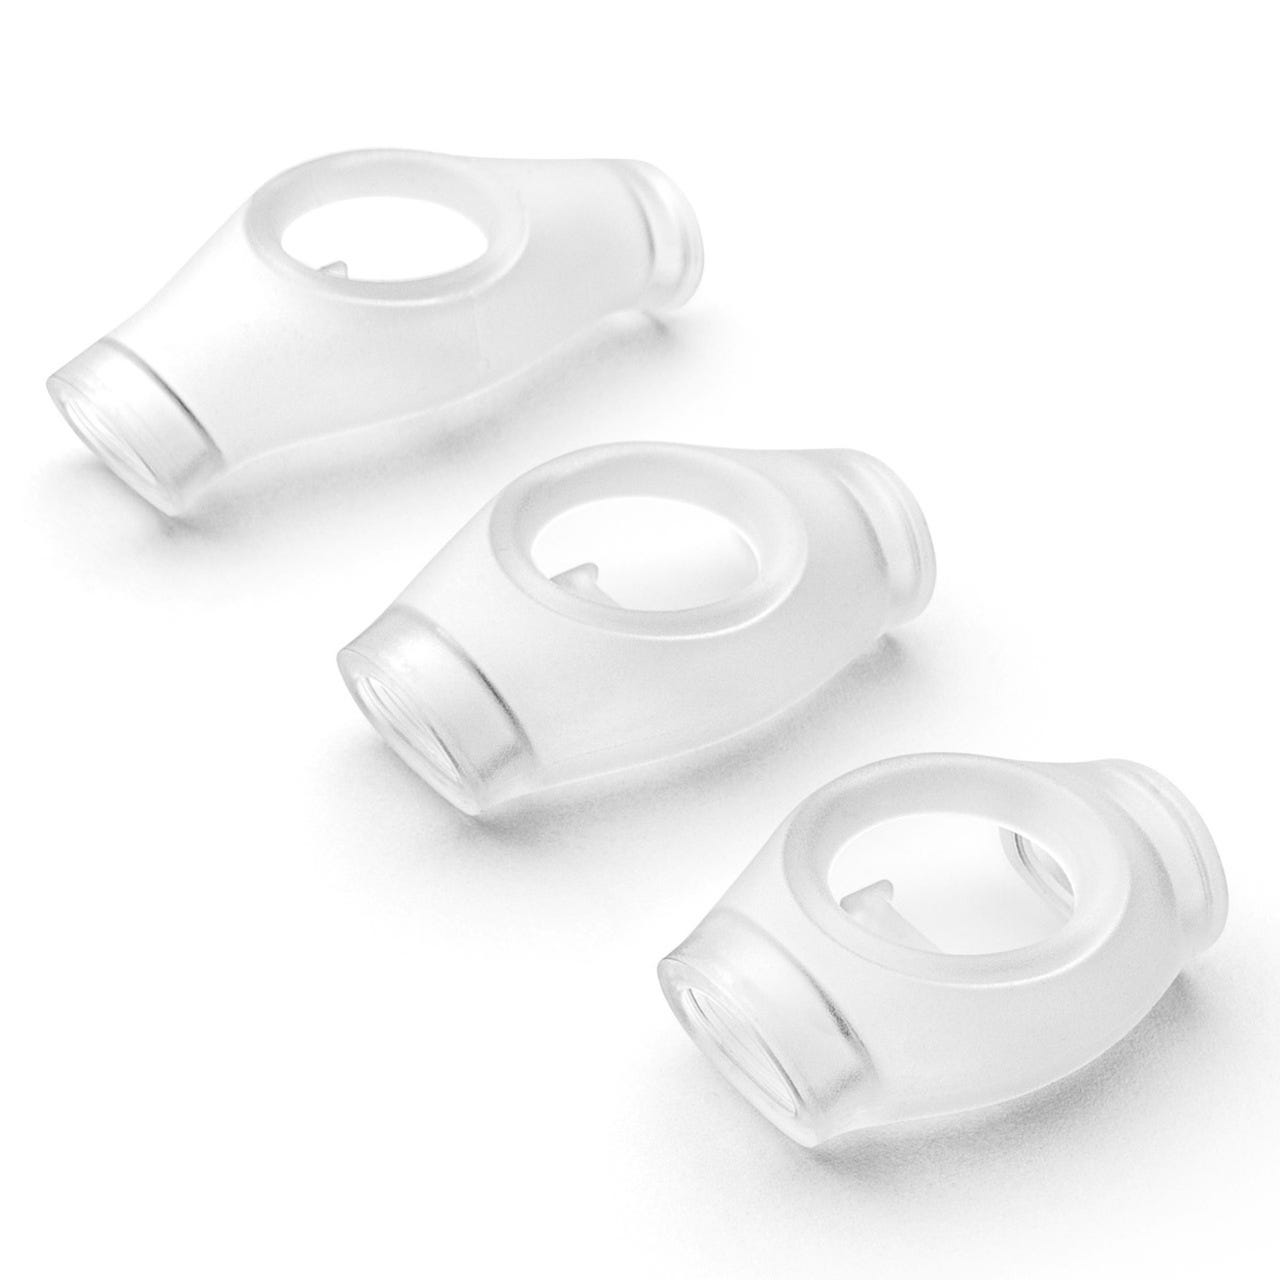 Philips Respironics DreamWisp Frame Connector For CPAP